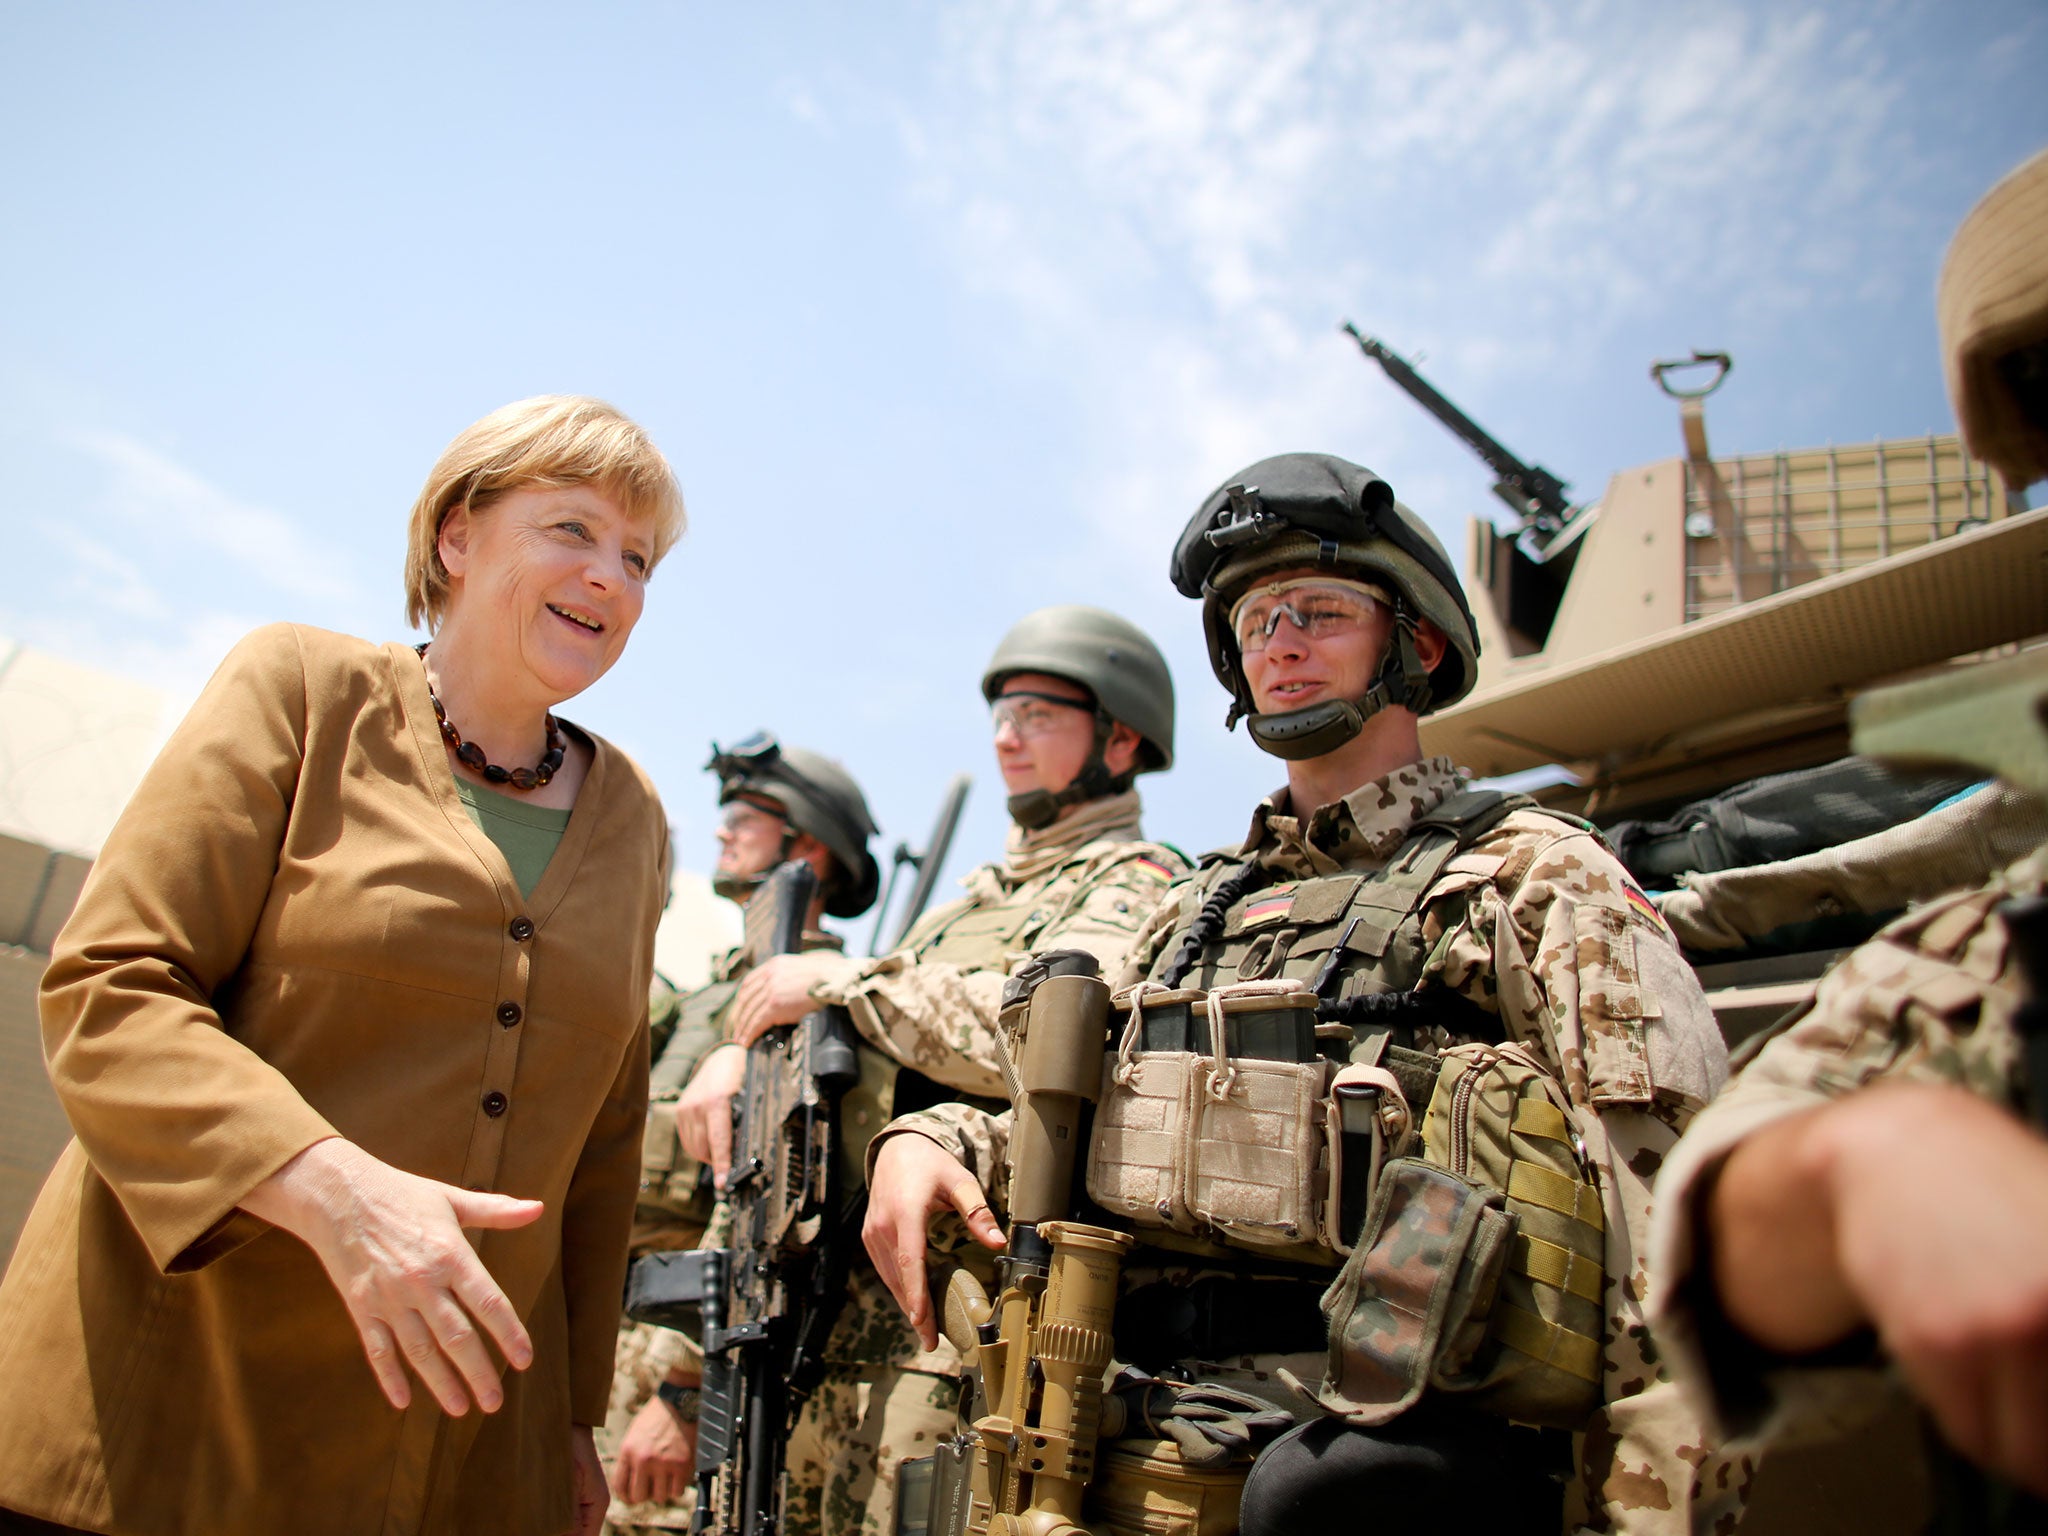 German Chancellor Angela Merkel shakes hands with soldiers of the German armed forces Bundeswehr during her visit on May 10, 2013 at the Bundeswehr base in Kunduz, Afghanistan.